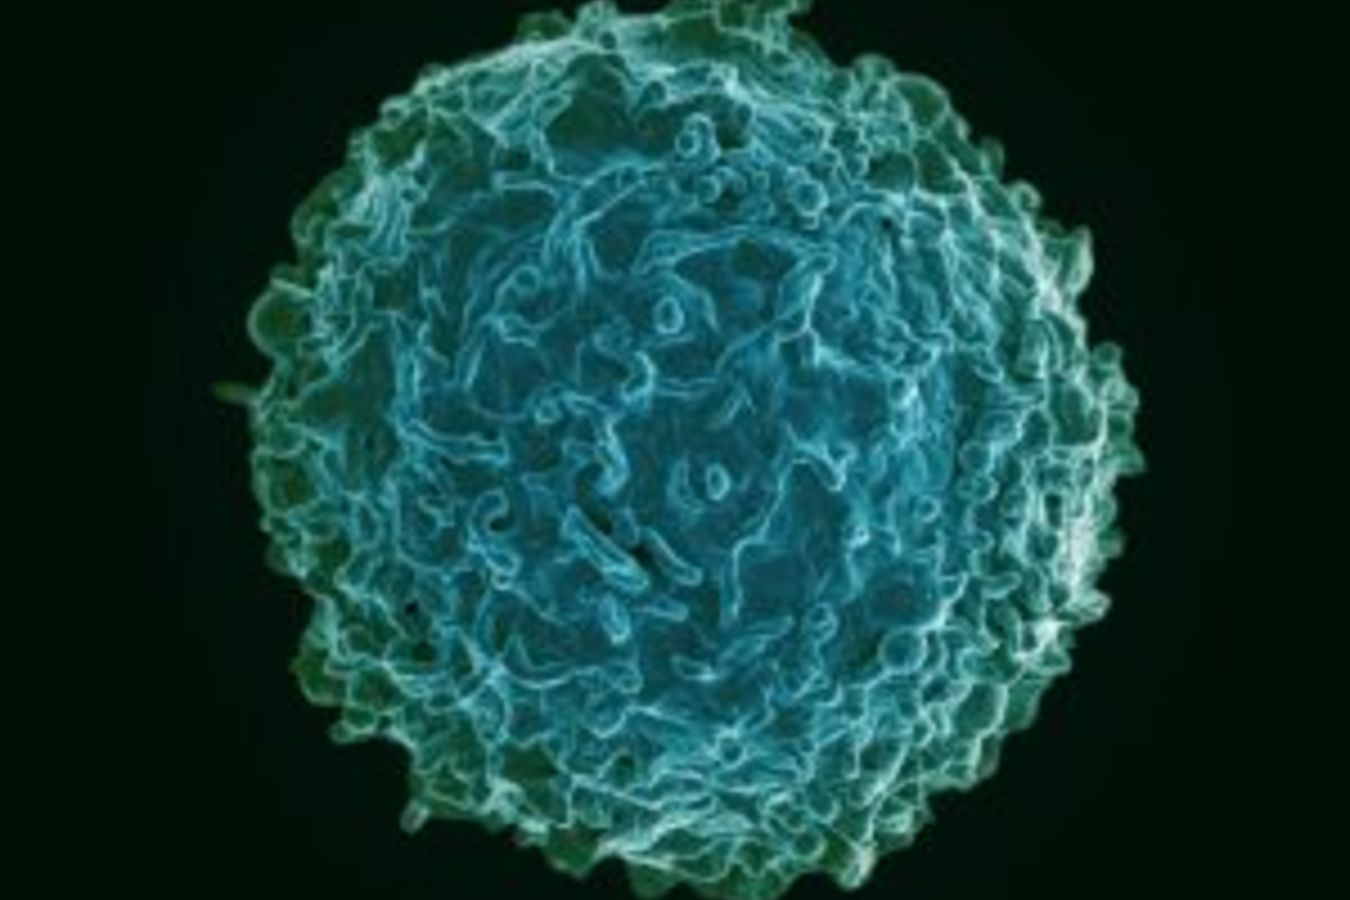 Image of a B cell